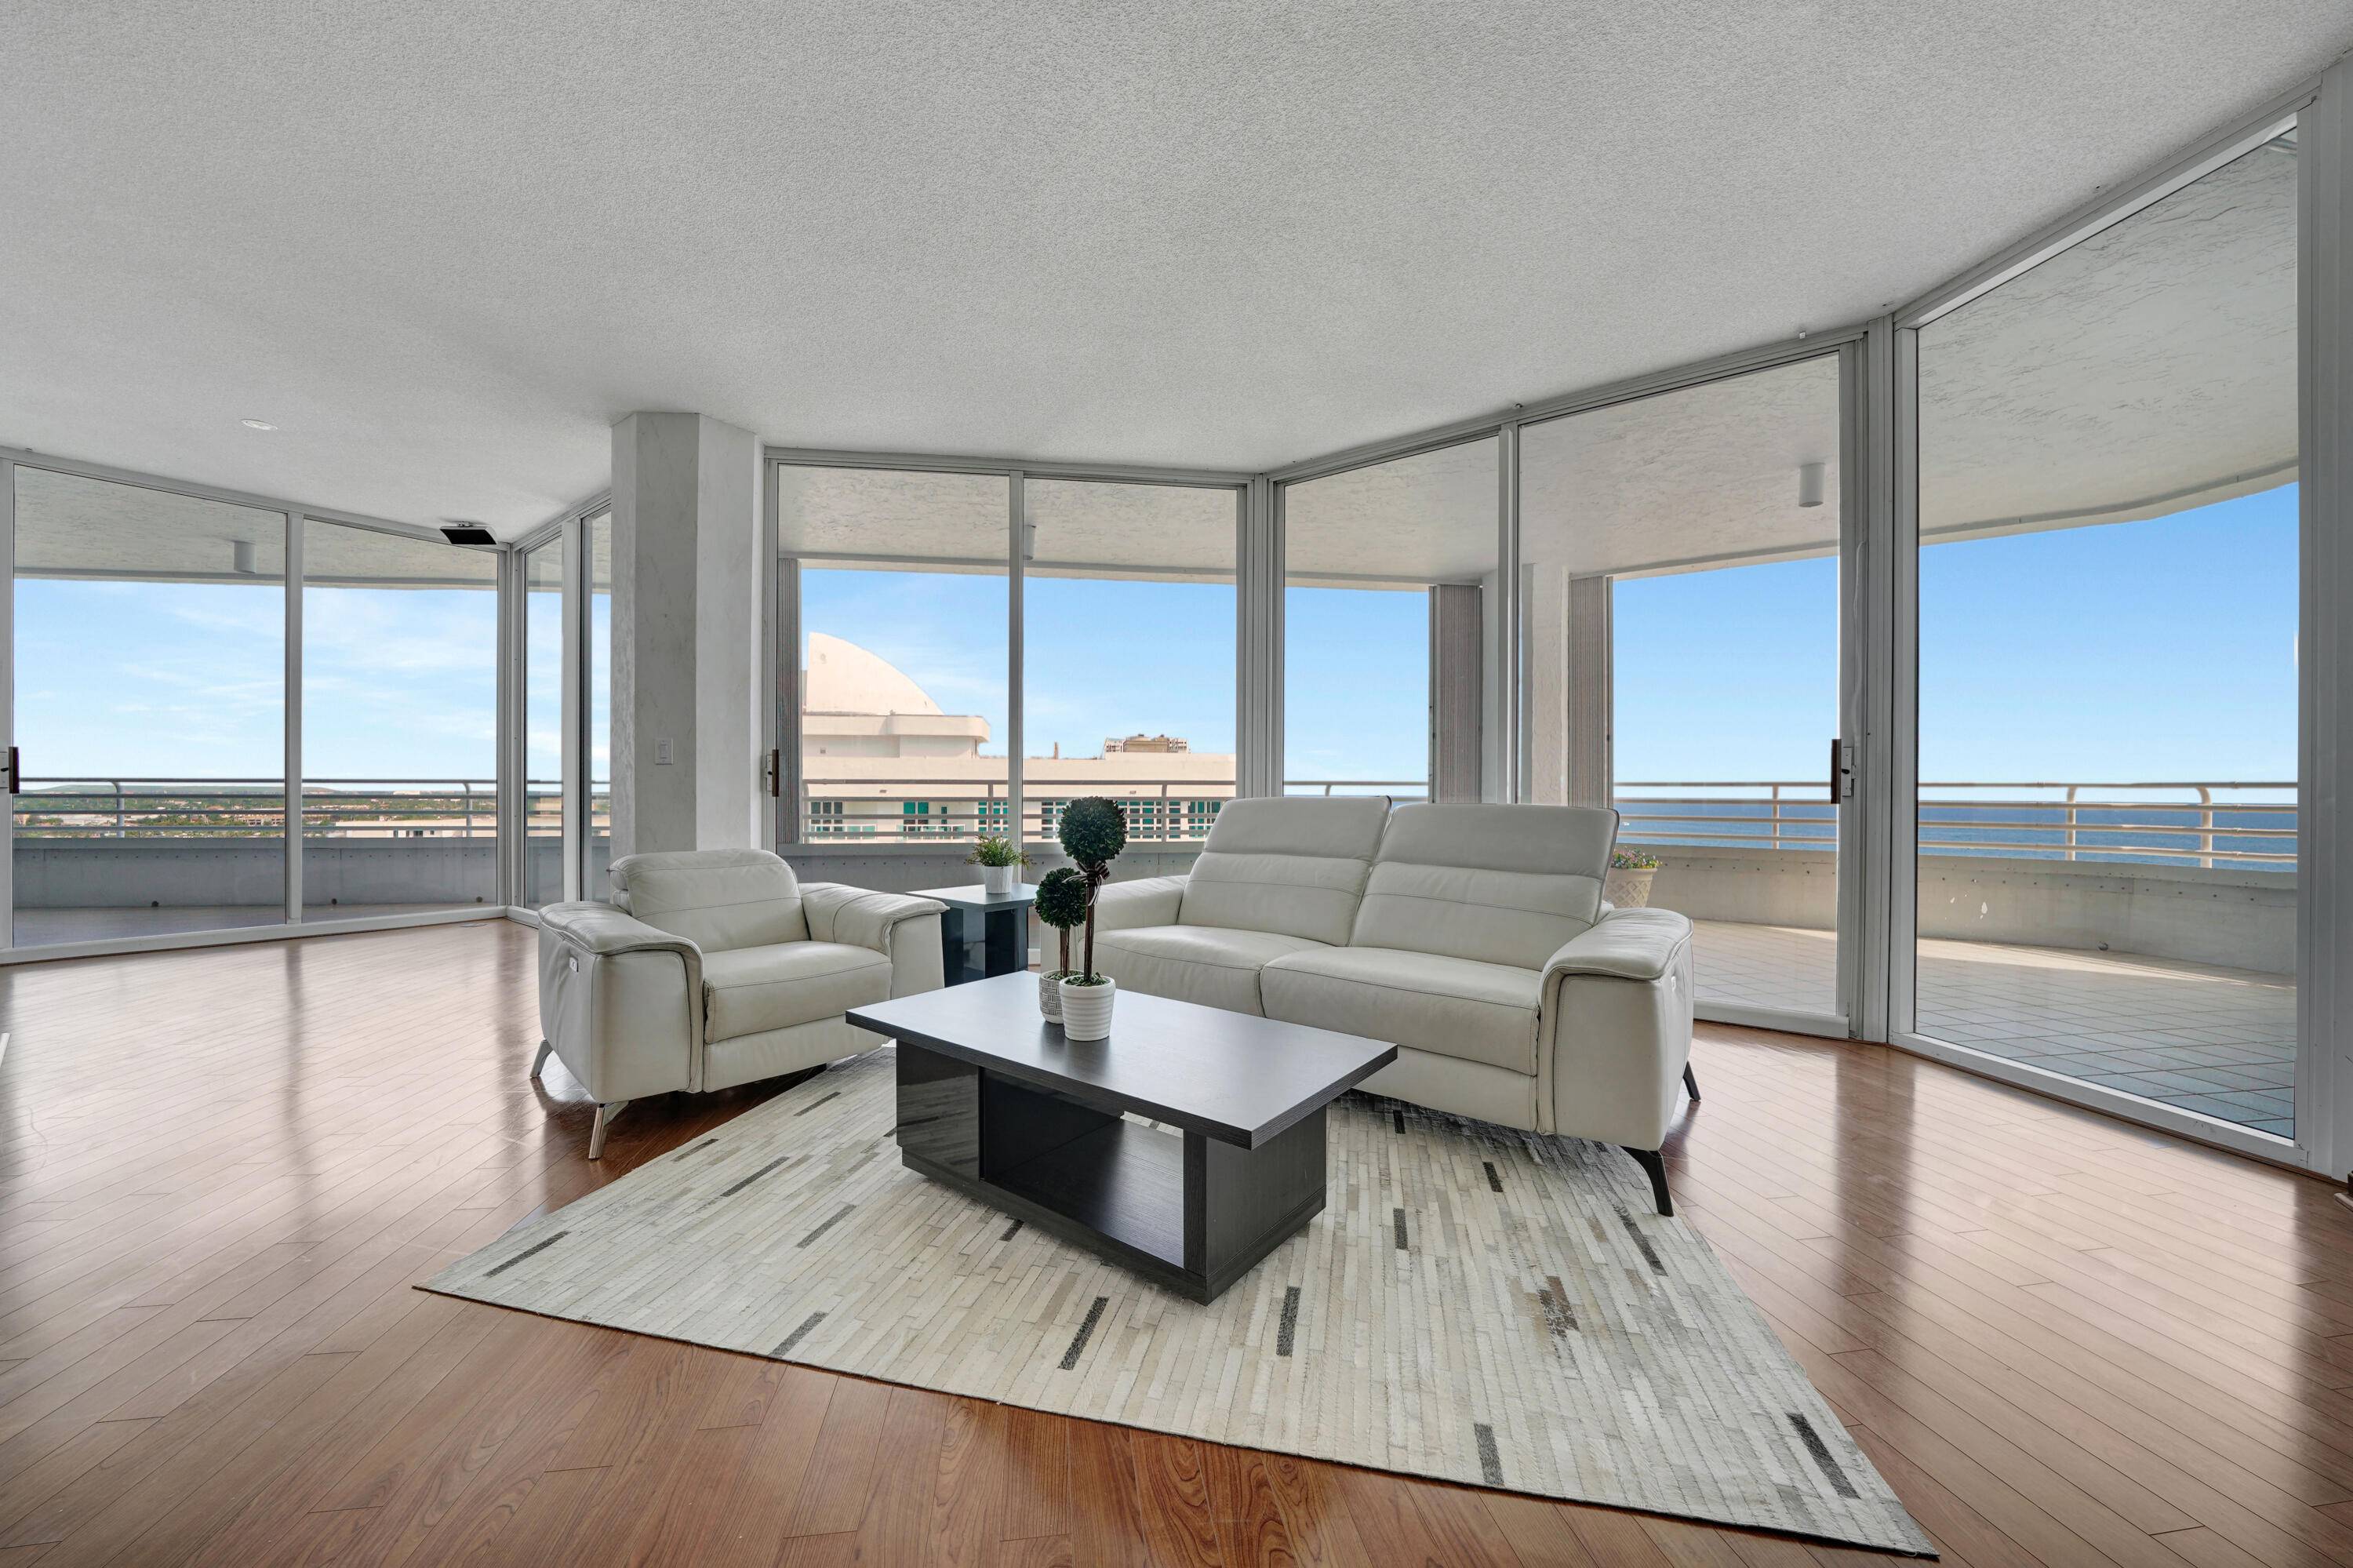 Indulge in modern luxury living within this exquisite penthouse unit perched on the 16th floor, offering breathtaking beach views and refreshing ocean breezes.